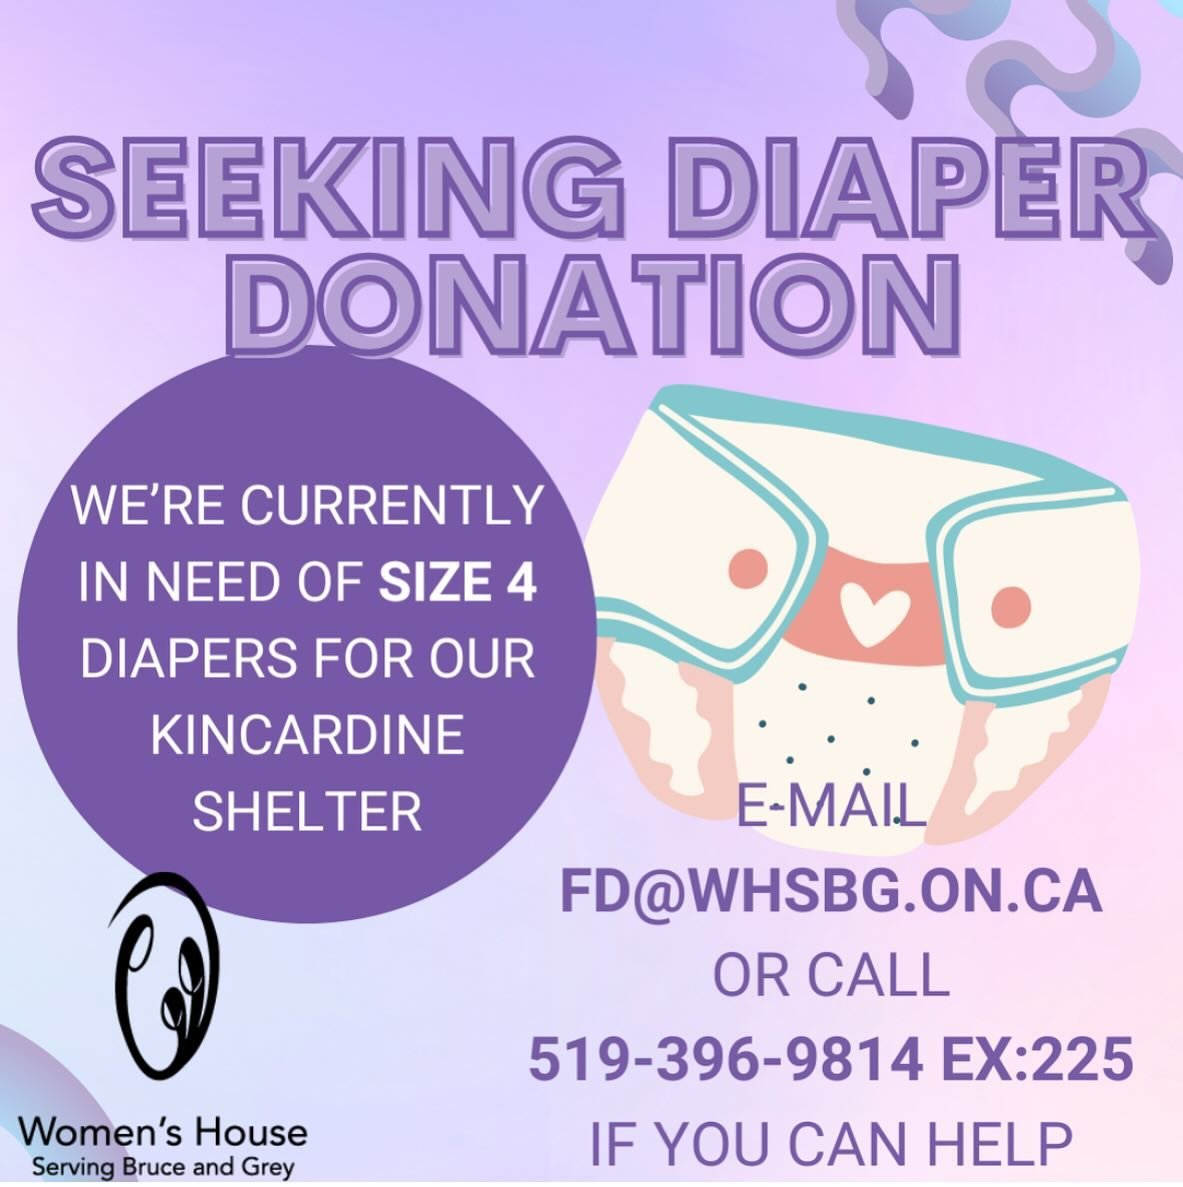 Please reach out if you can help. We&rsquo;re always super appreciative of our community&rsquo;s generosity.🤗
#whsbg #downtownkincardine #kincardinestrong #kincardinebia #kincardinechamber